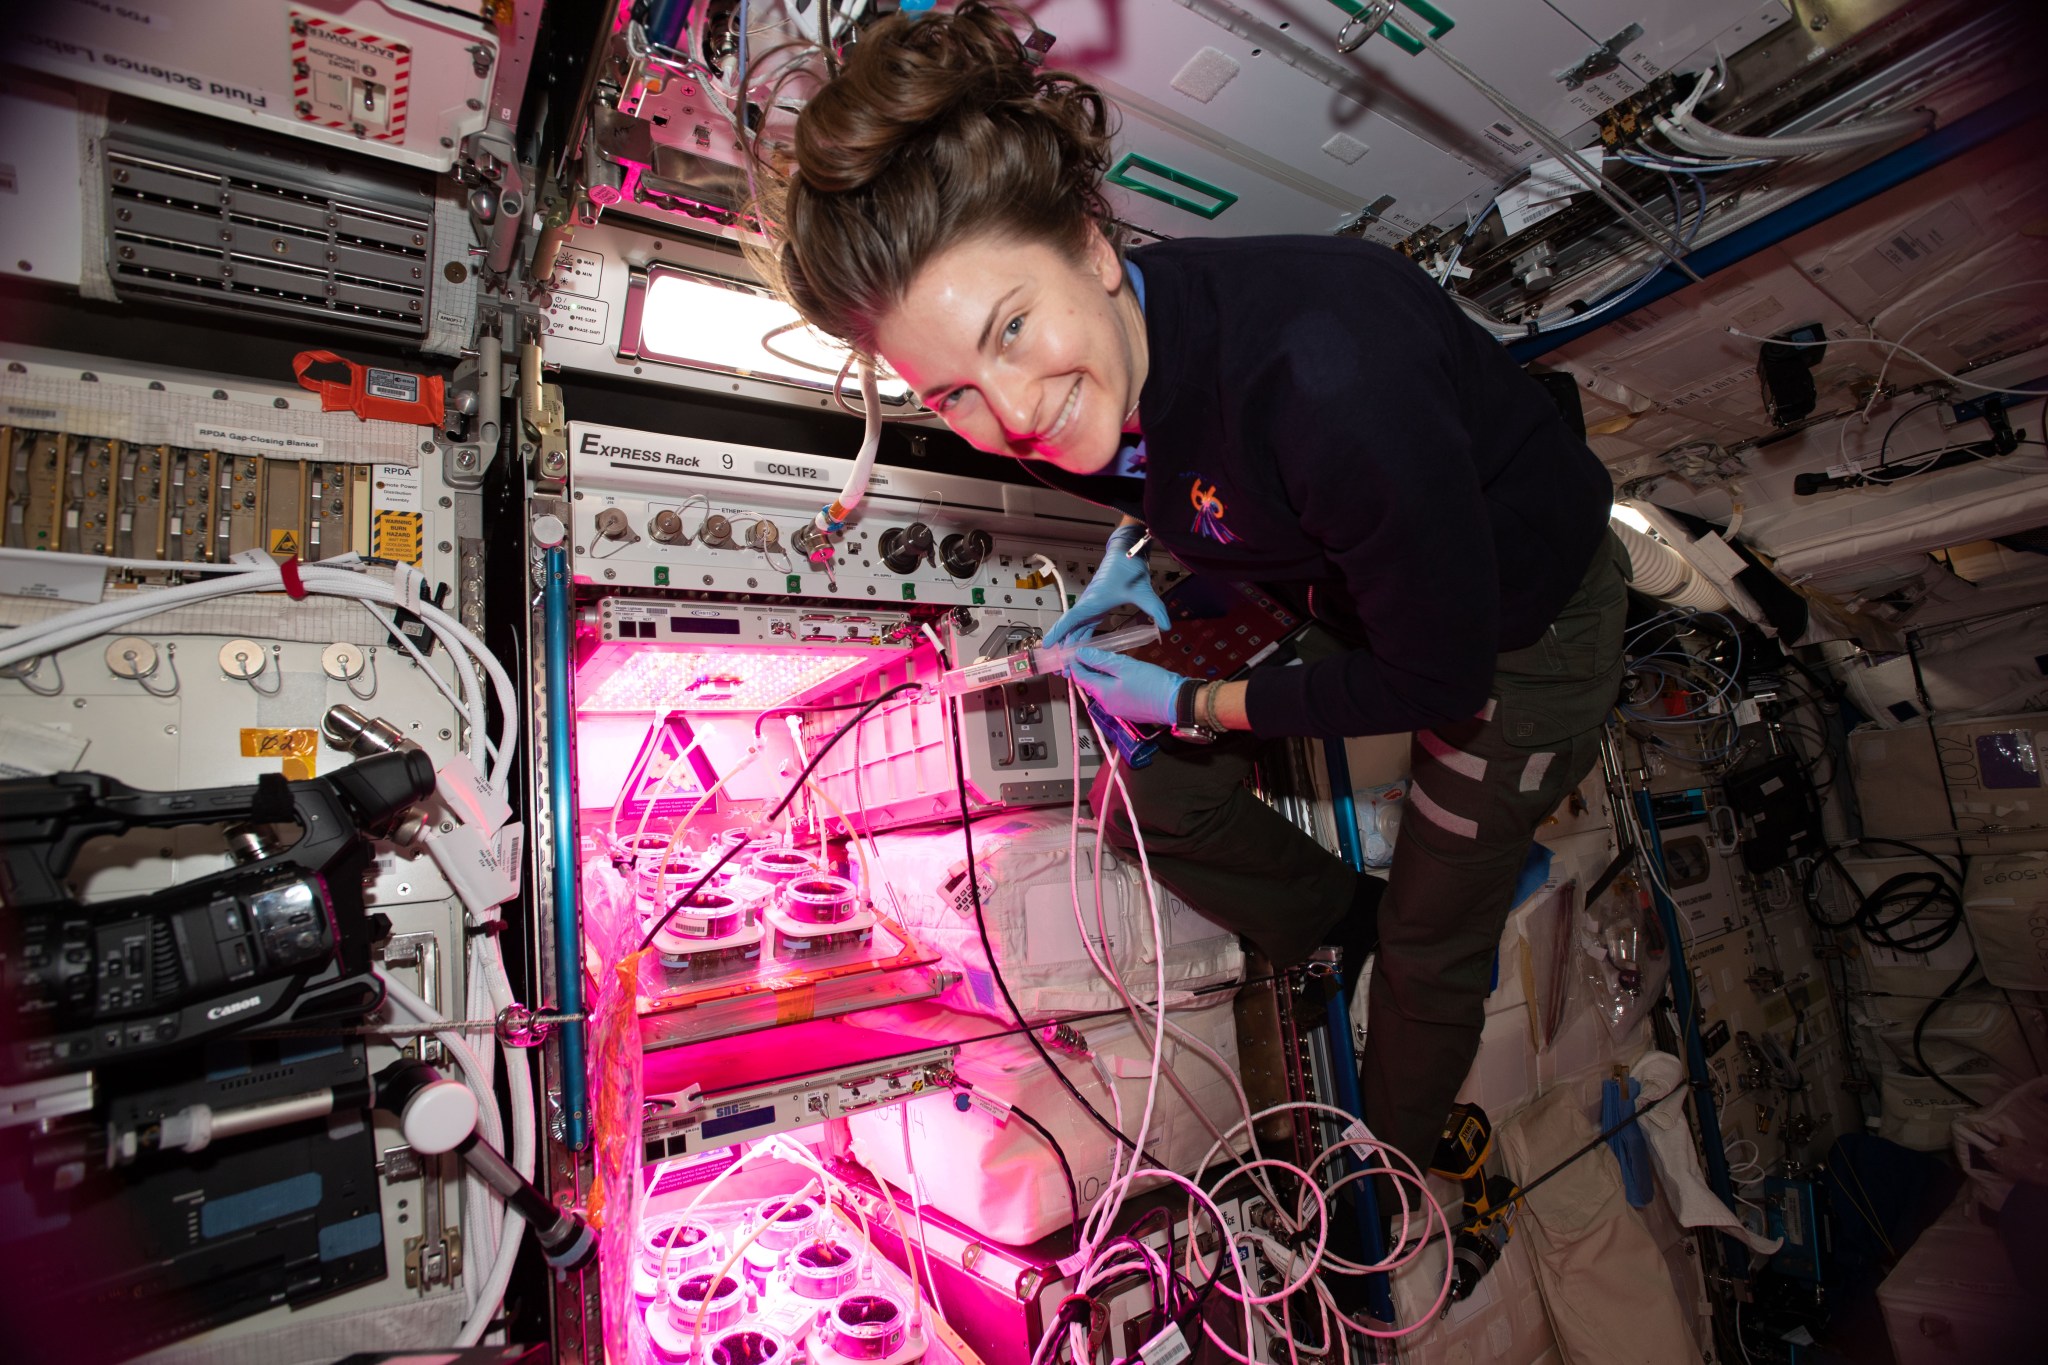 NASA astronaut Kayla Barron monitors experiments in one of the International Space Station’s 12 EXPRESS Racks during Expedition 66.